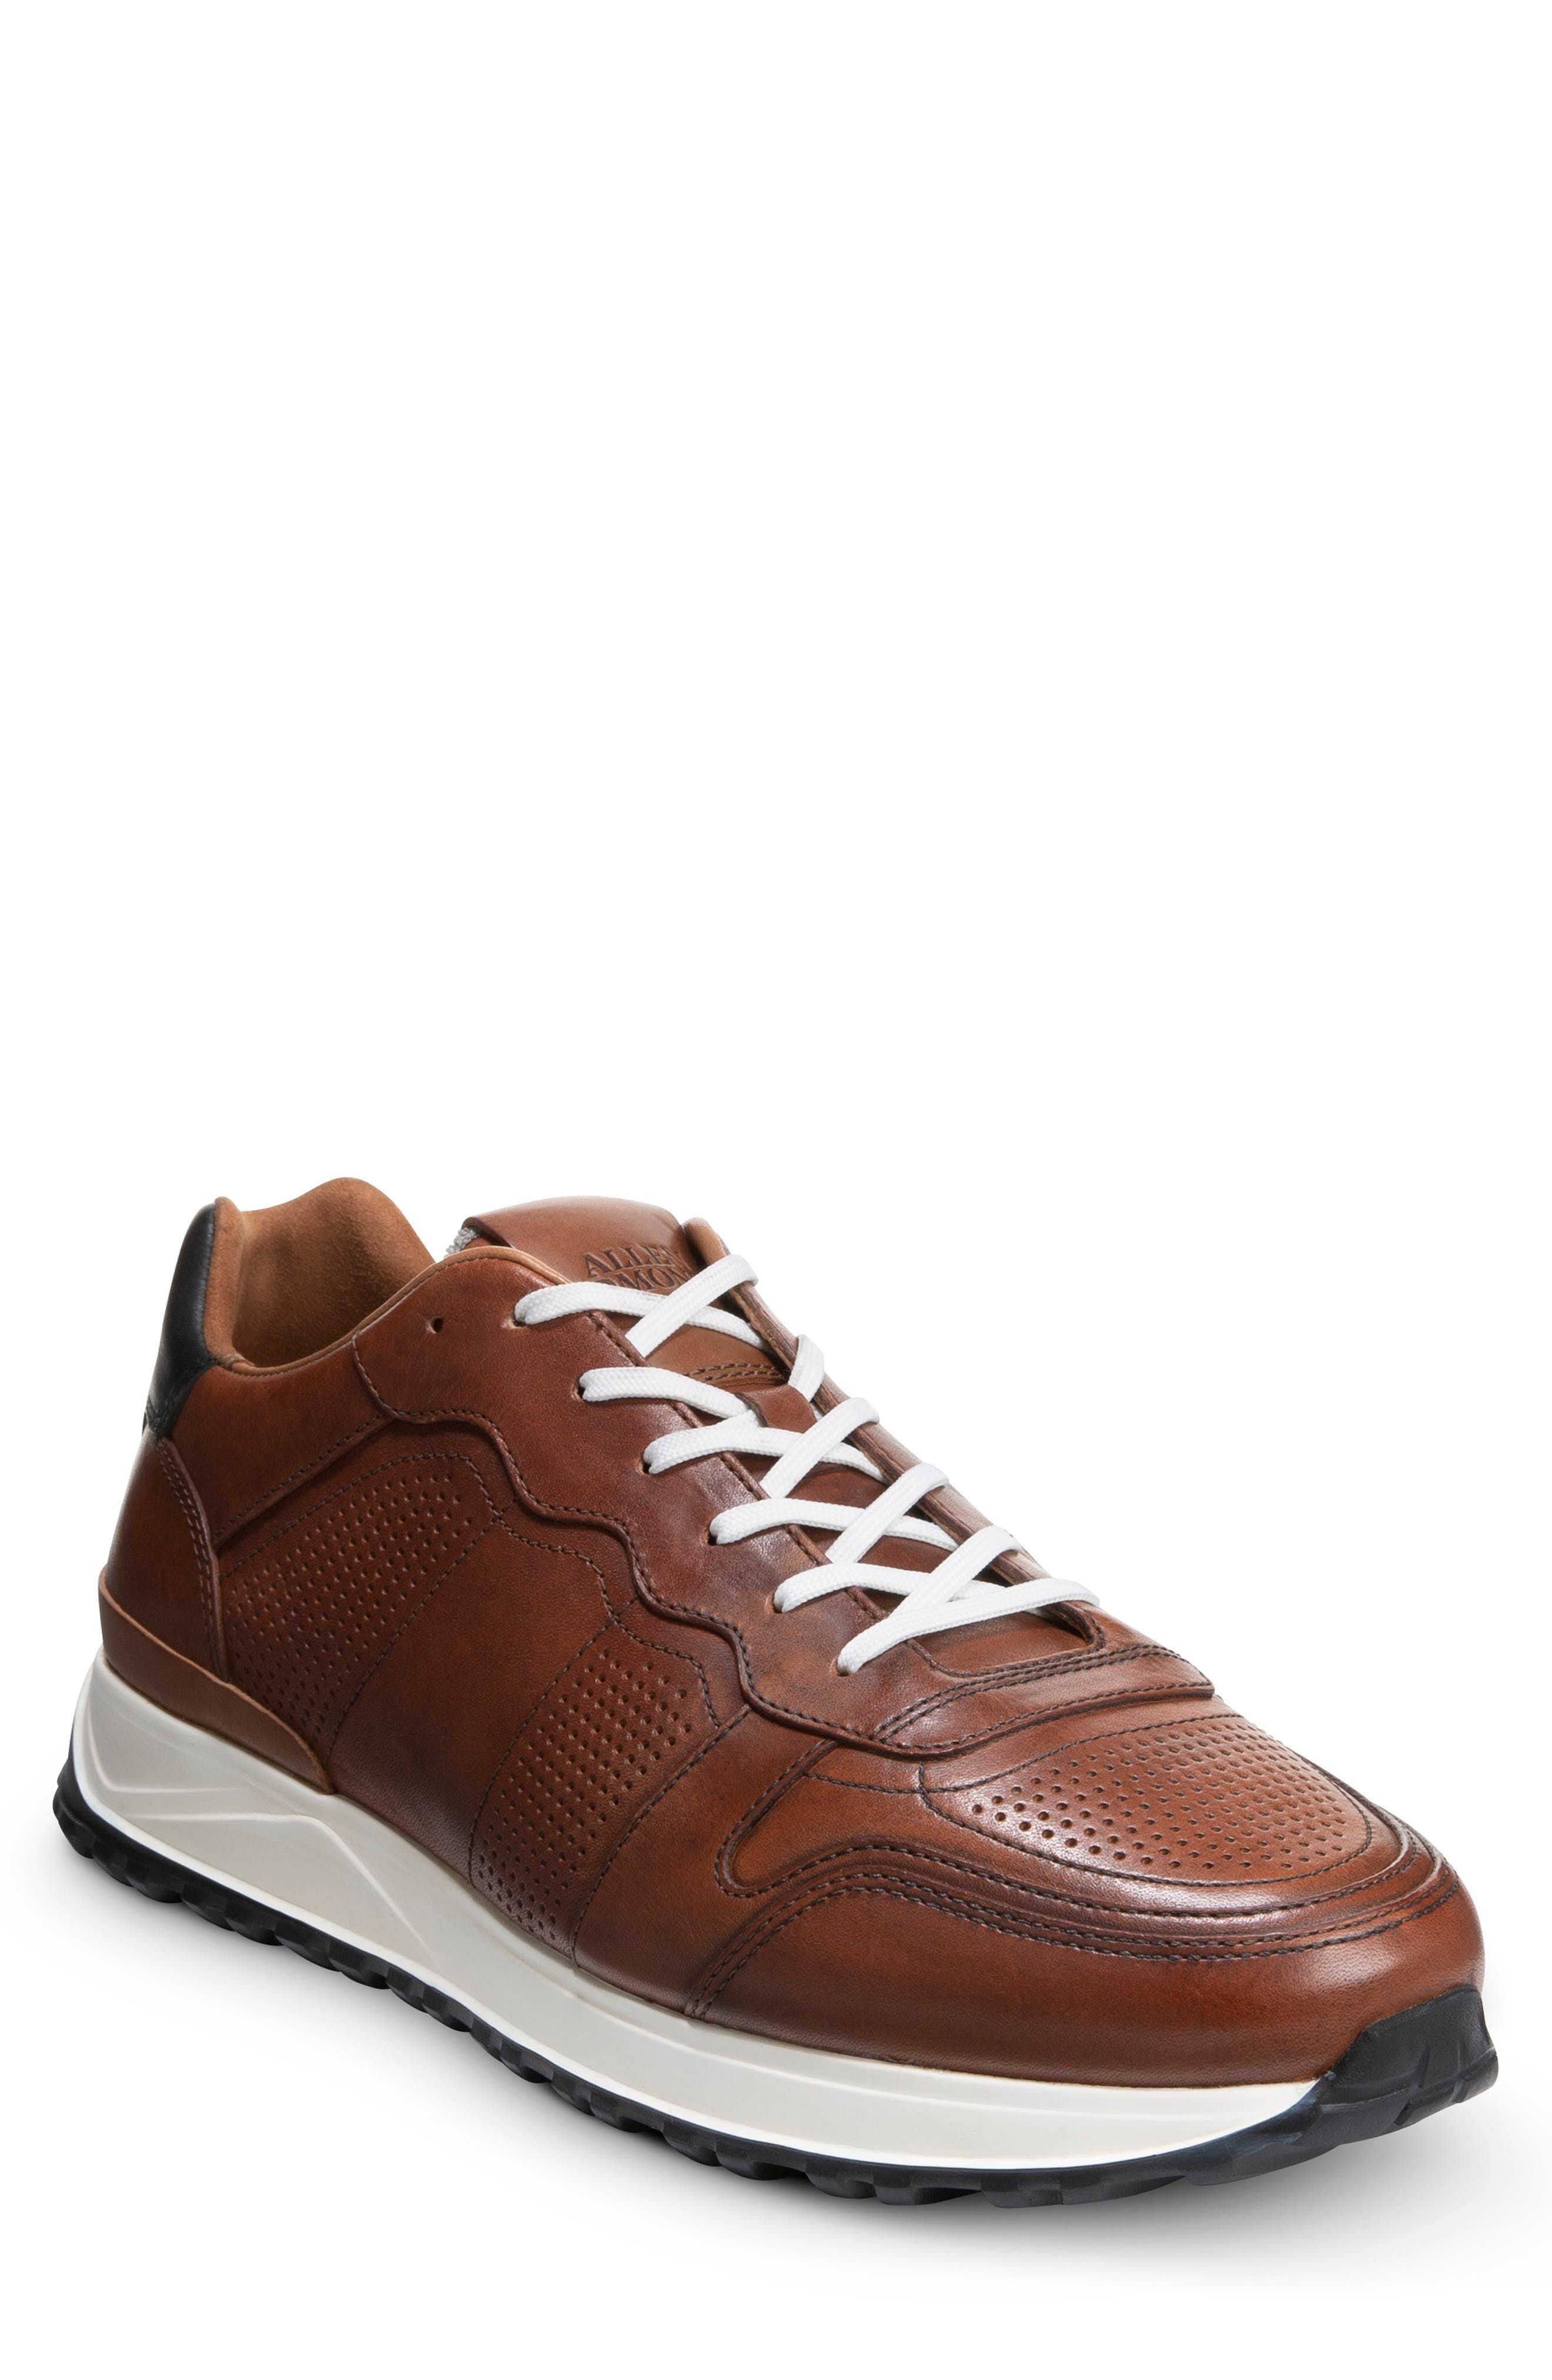 dressy casual shoes mens OFF 75%